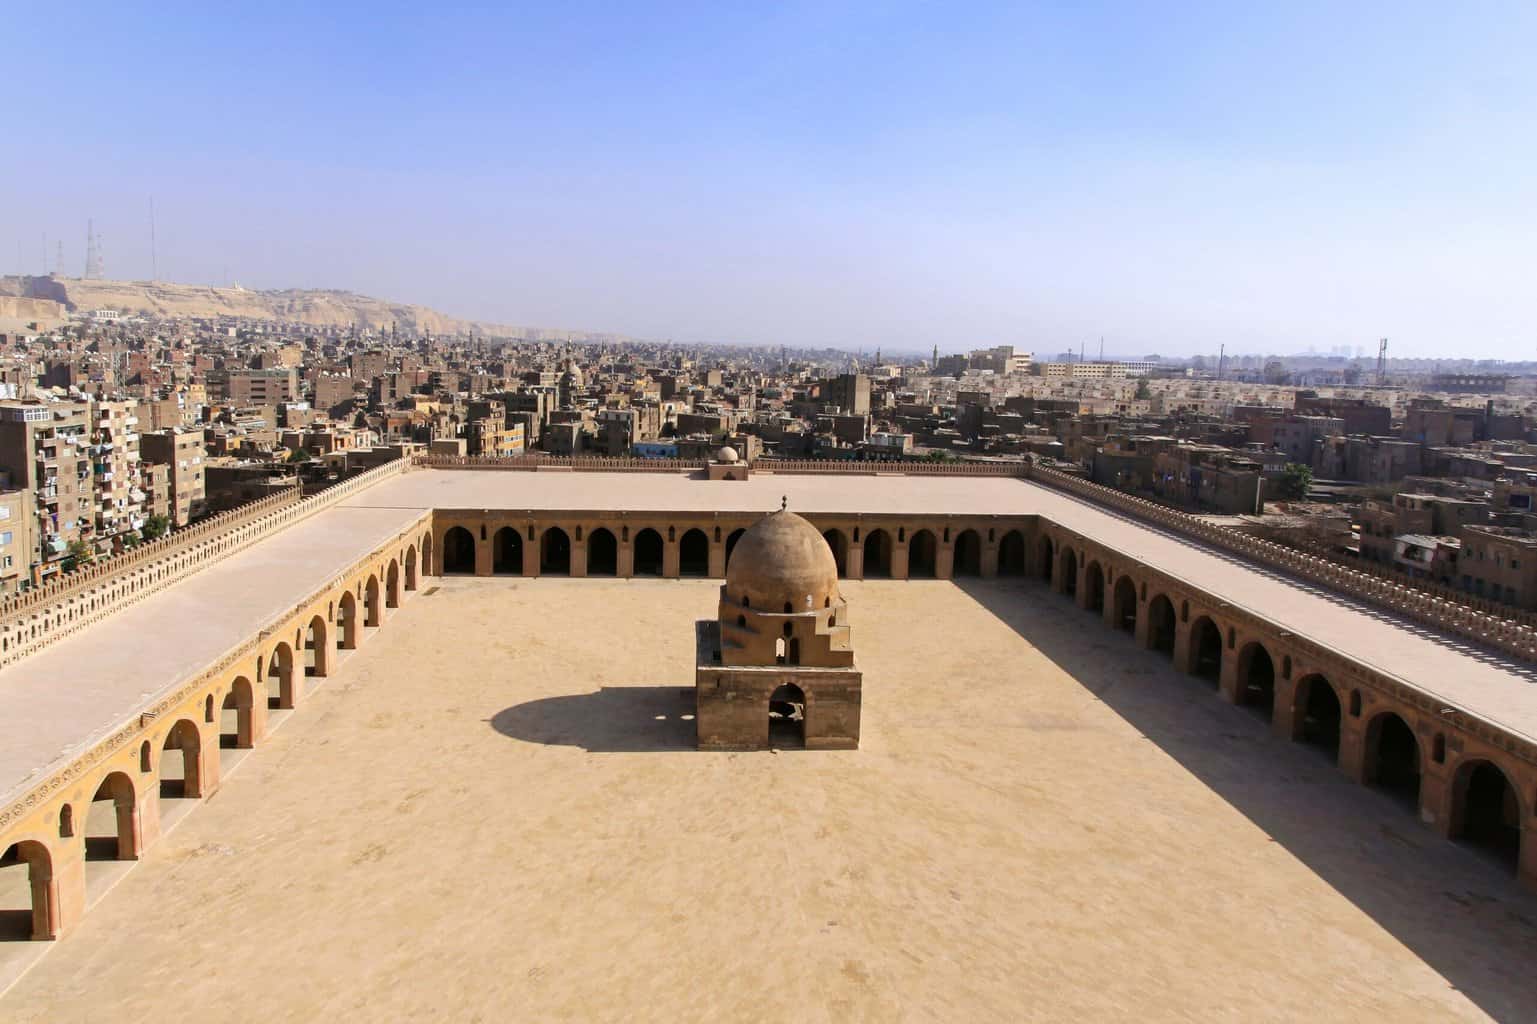 Ibn Tulun Mosque min scaled The oldest section or district in Cairo is described by many names, either Old Cairo, Islamic Cairo, Cairo of Al-Muizz, Historic Cairo, or Medieval Cairo, it mainly refers to the historical areas of Cairo, which existed before the modern expansion of the city during the 19th and 20th centuries, especially the central parts around the old walled city and the Cairo Citadel. 